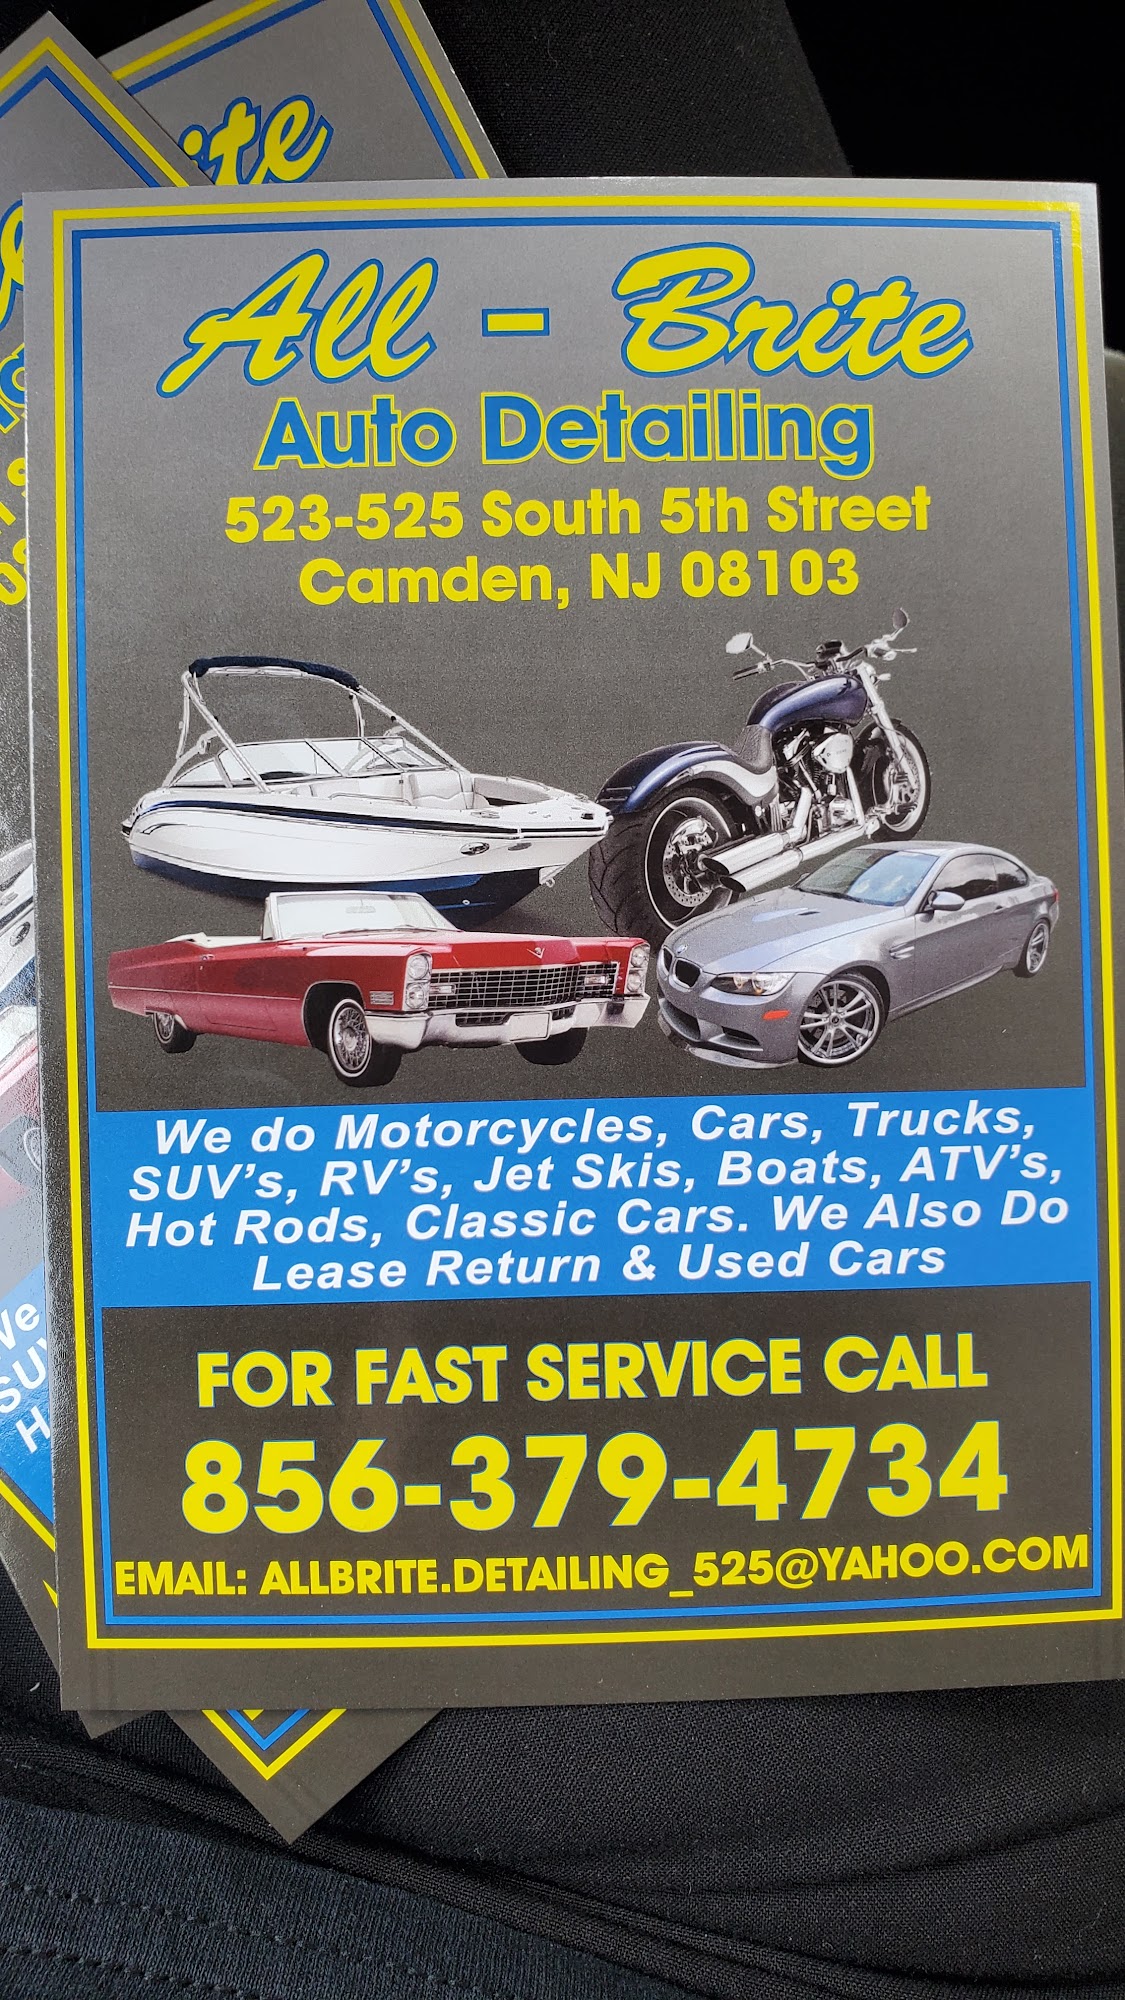 Albright Auto Detailing 539 S 5th St, Camden New Jersey 08103